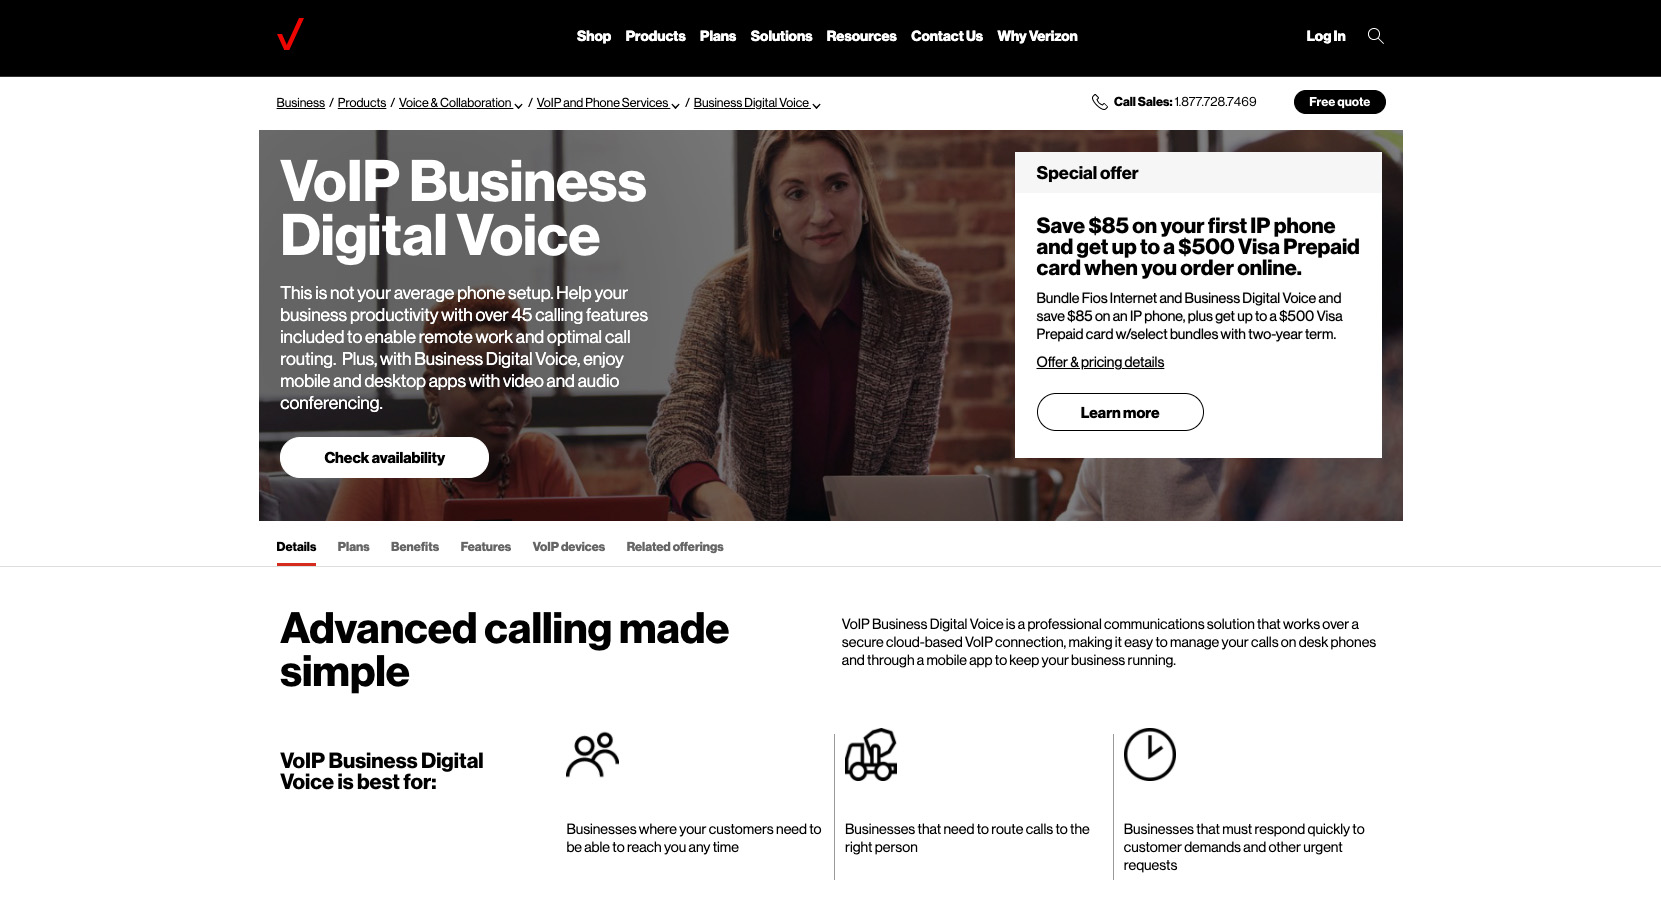 Verizon Business VoIP: A Closer Look at Plans & Pricing